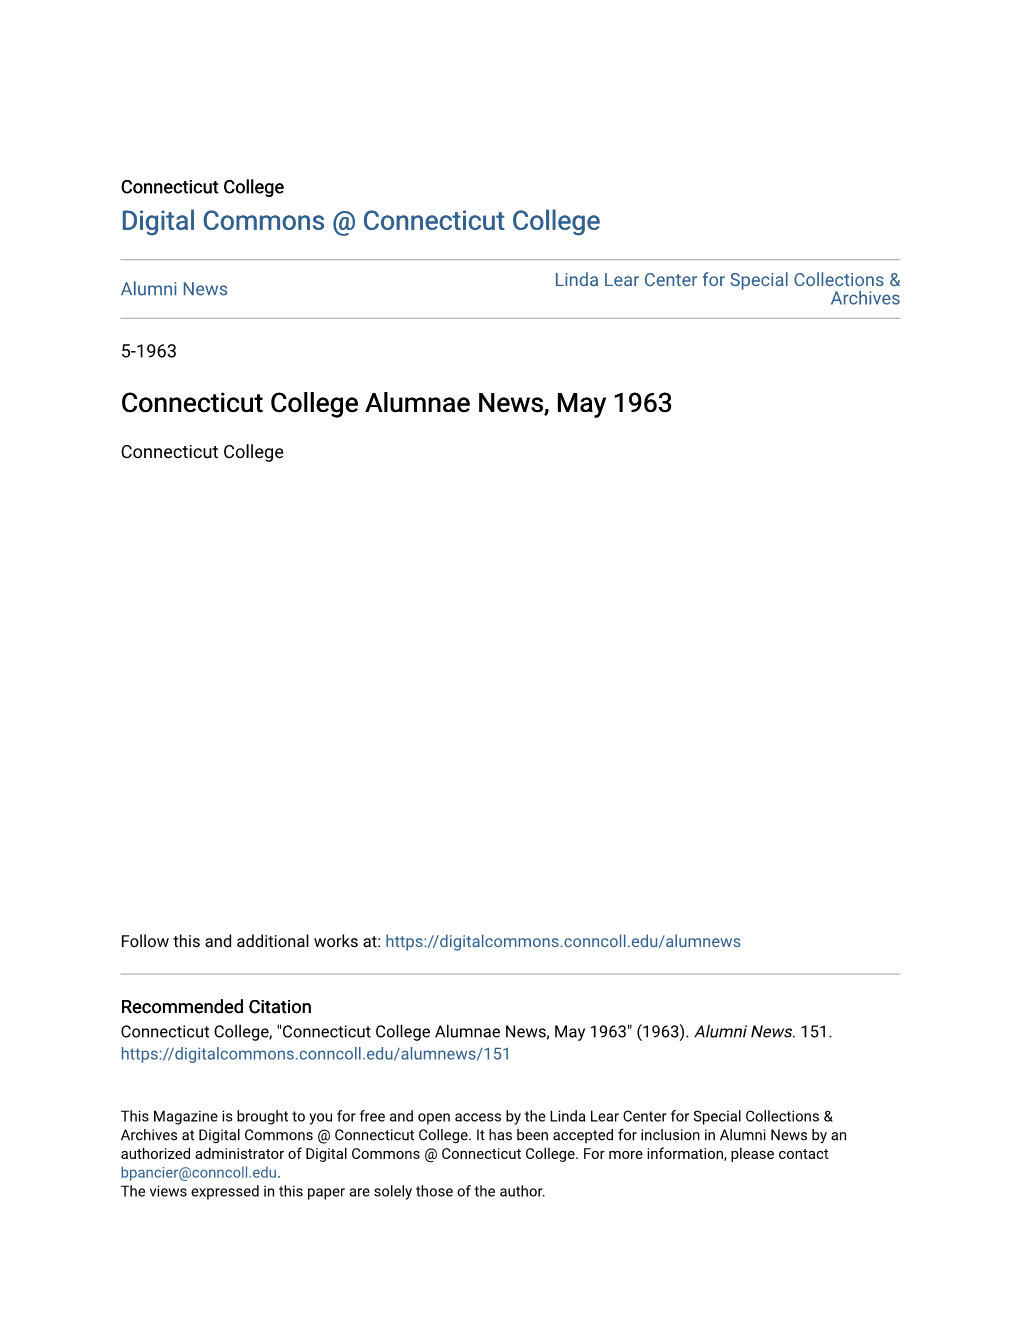 Connecticut College Alumnae News, May 1963